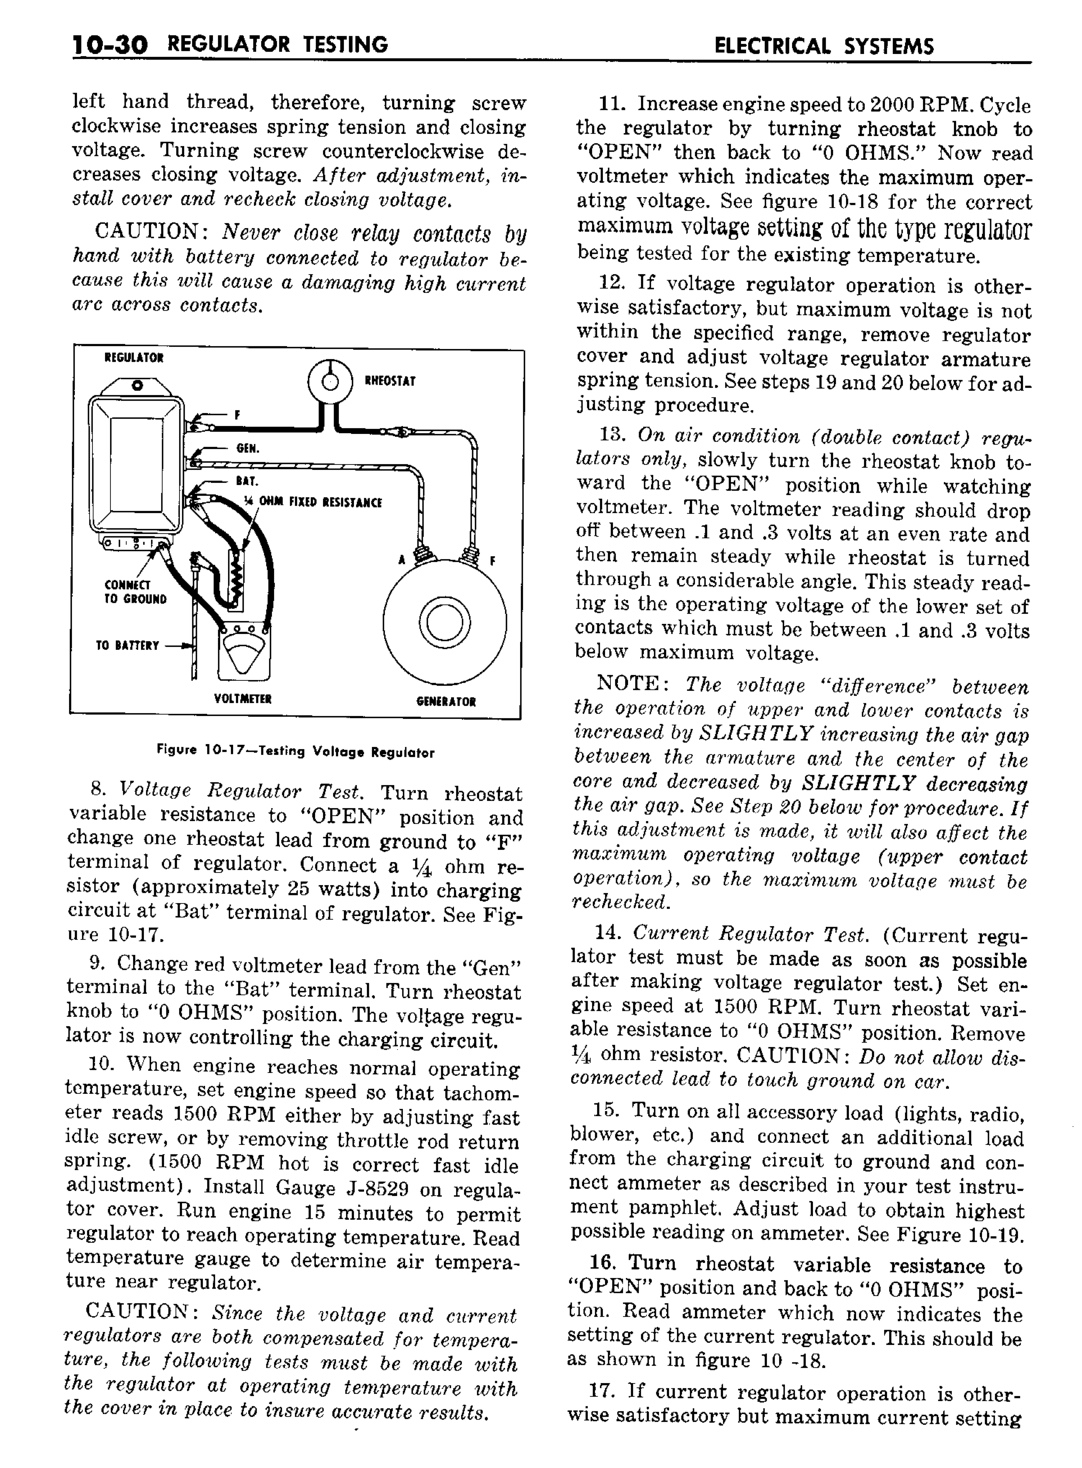 n_11 1960 Buick Shop Manual - Electrical Systems-030-030.jpg